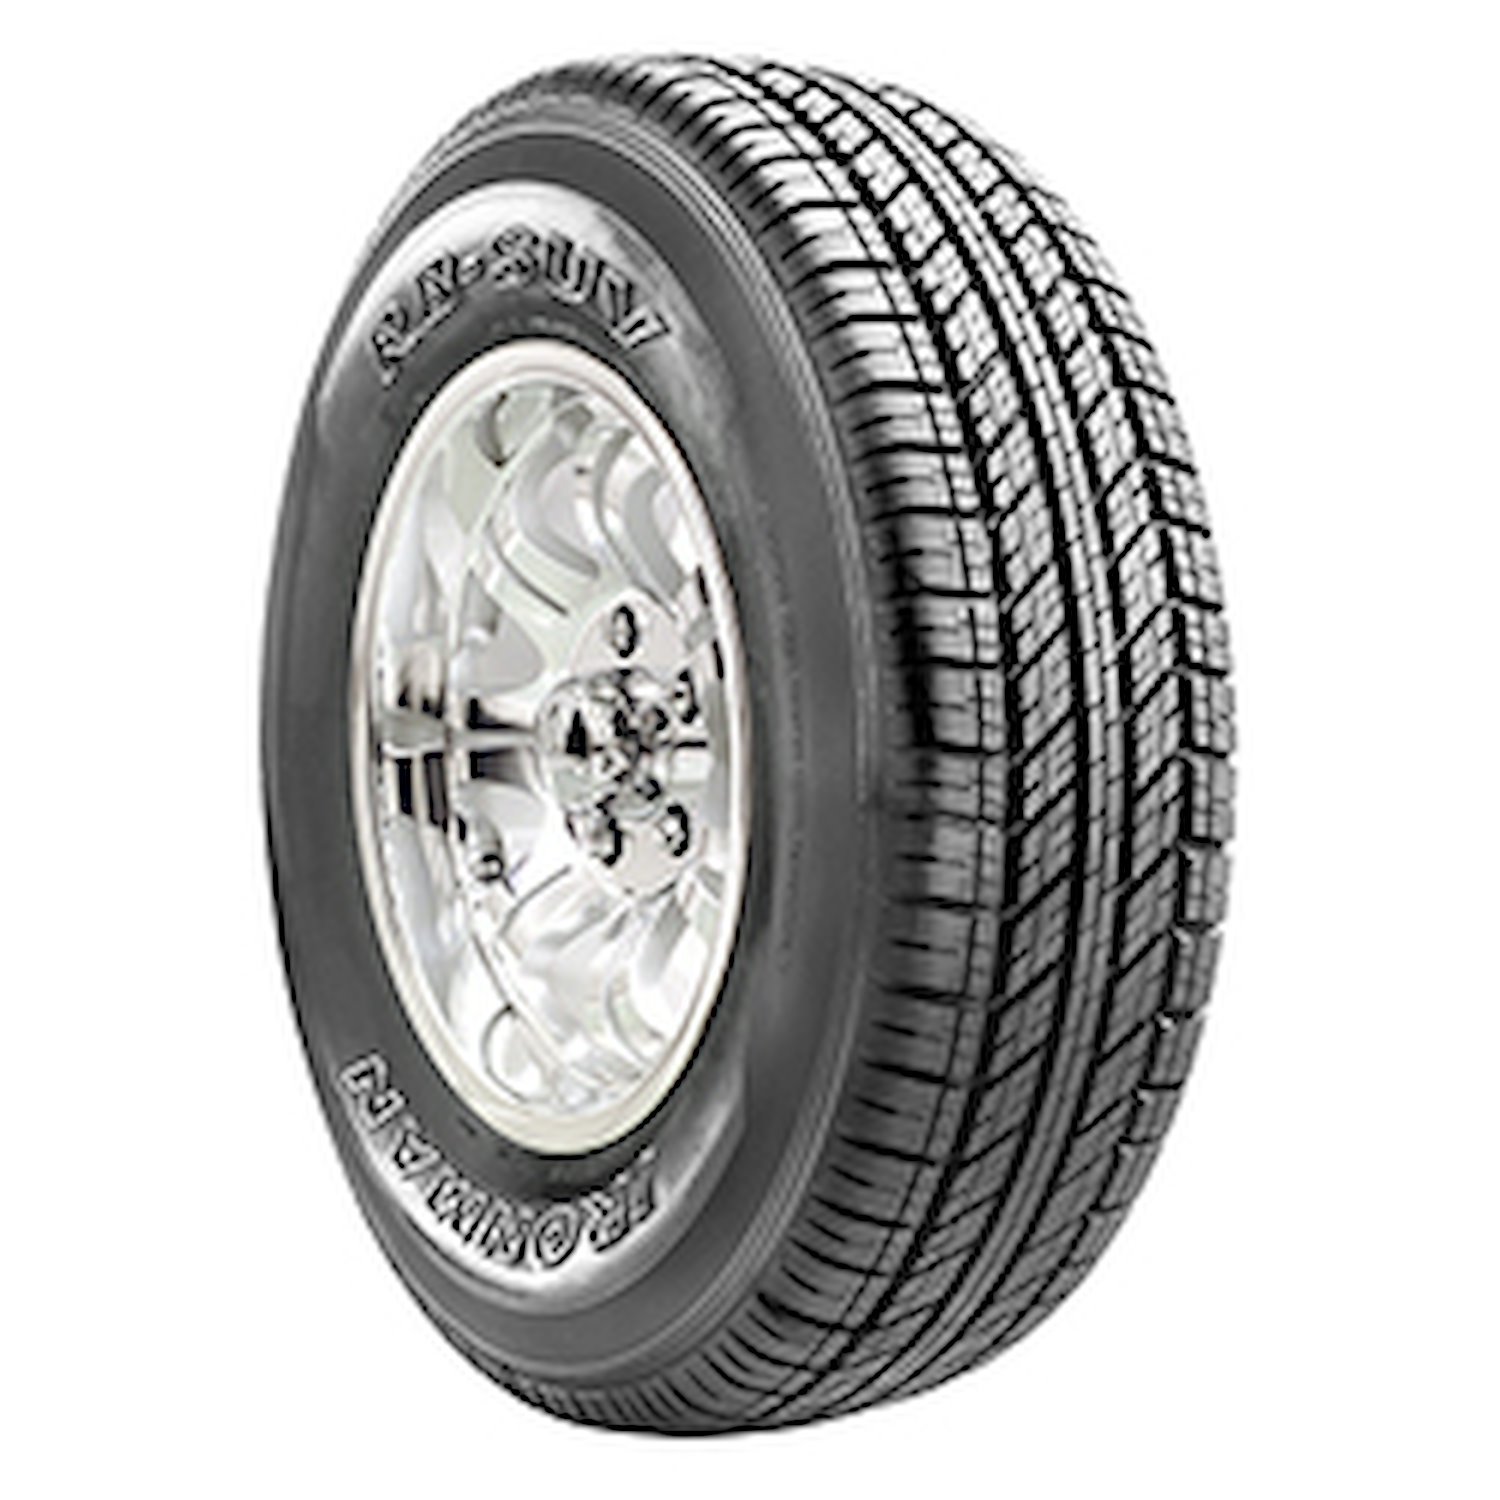 RB SUV Tire, 265/70R17 115S